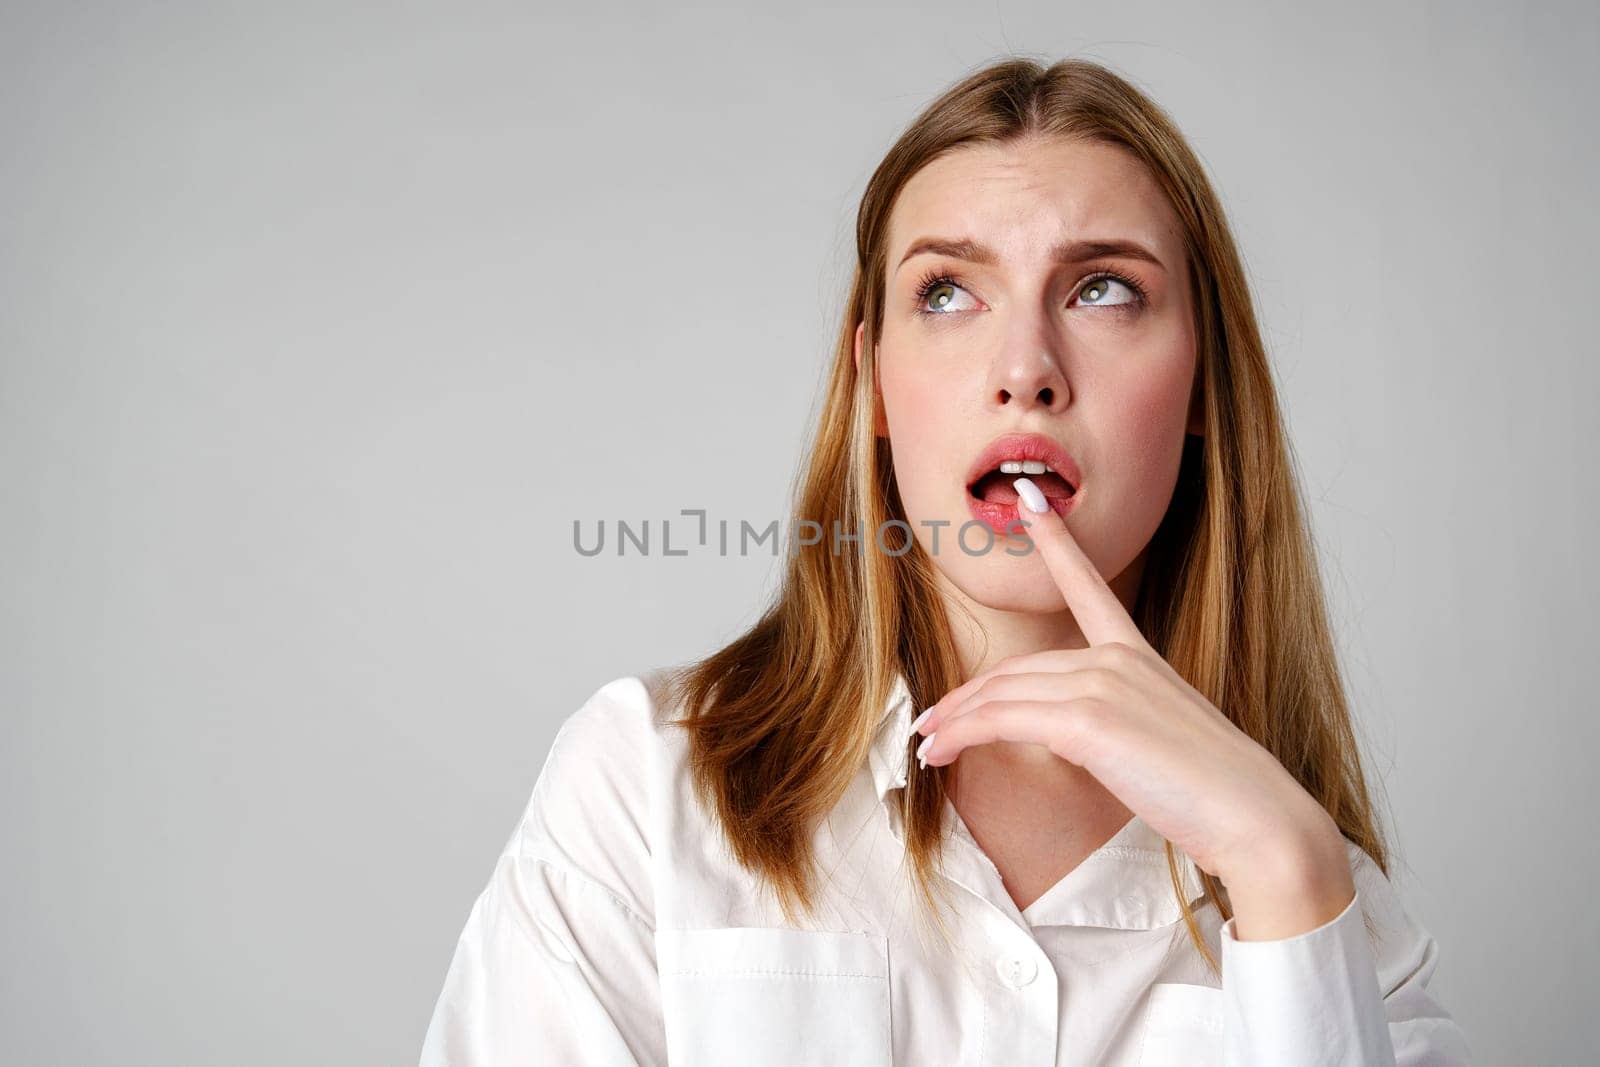 Woman in White Shirt Holding Finger to Lips by Fabrikasimf